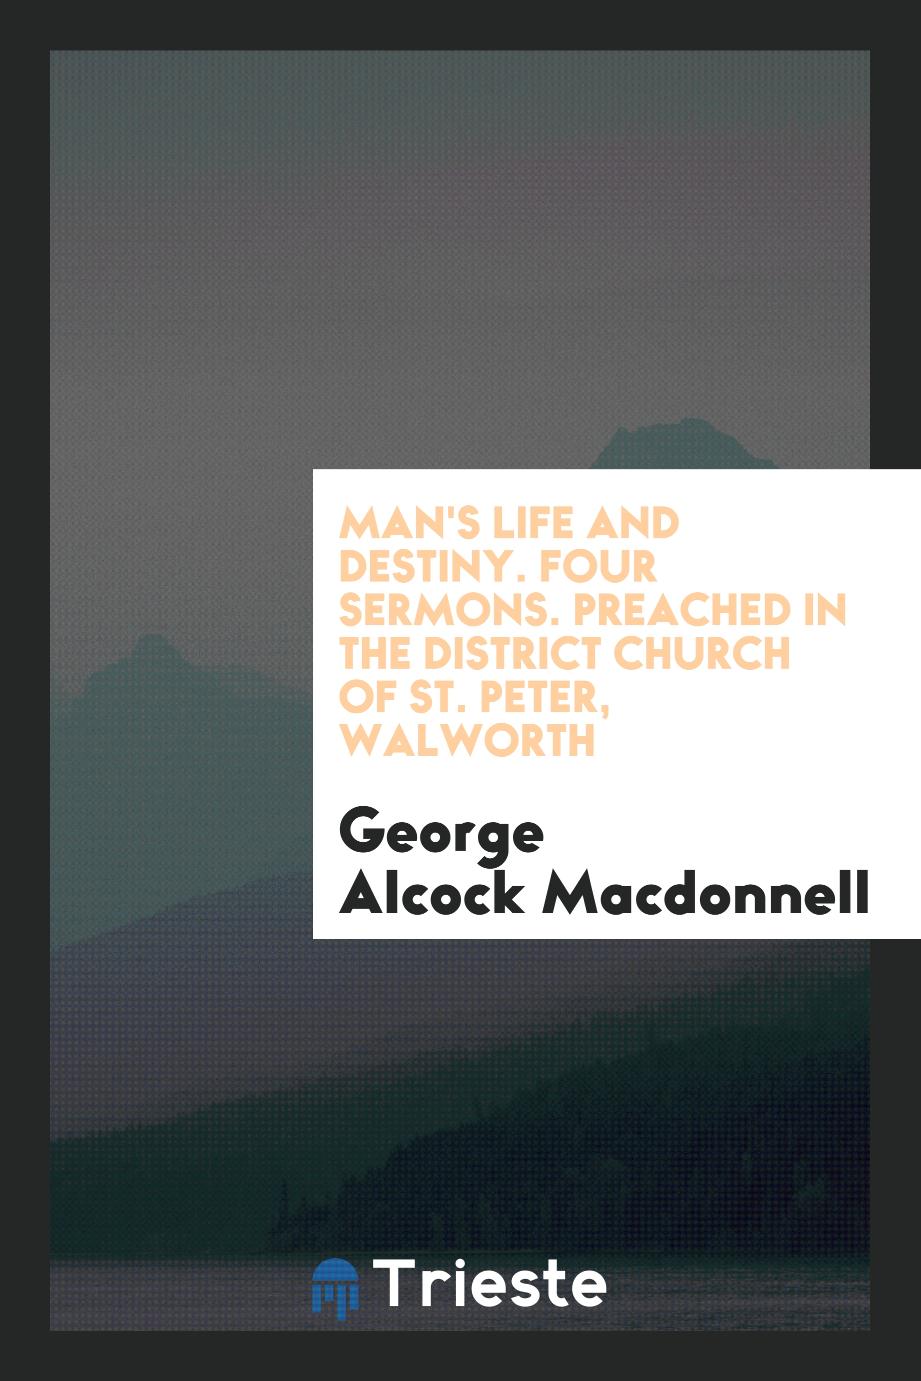 Man's life and destiny. Four sermons. Preached in the district church of St. Peter, Walworth